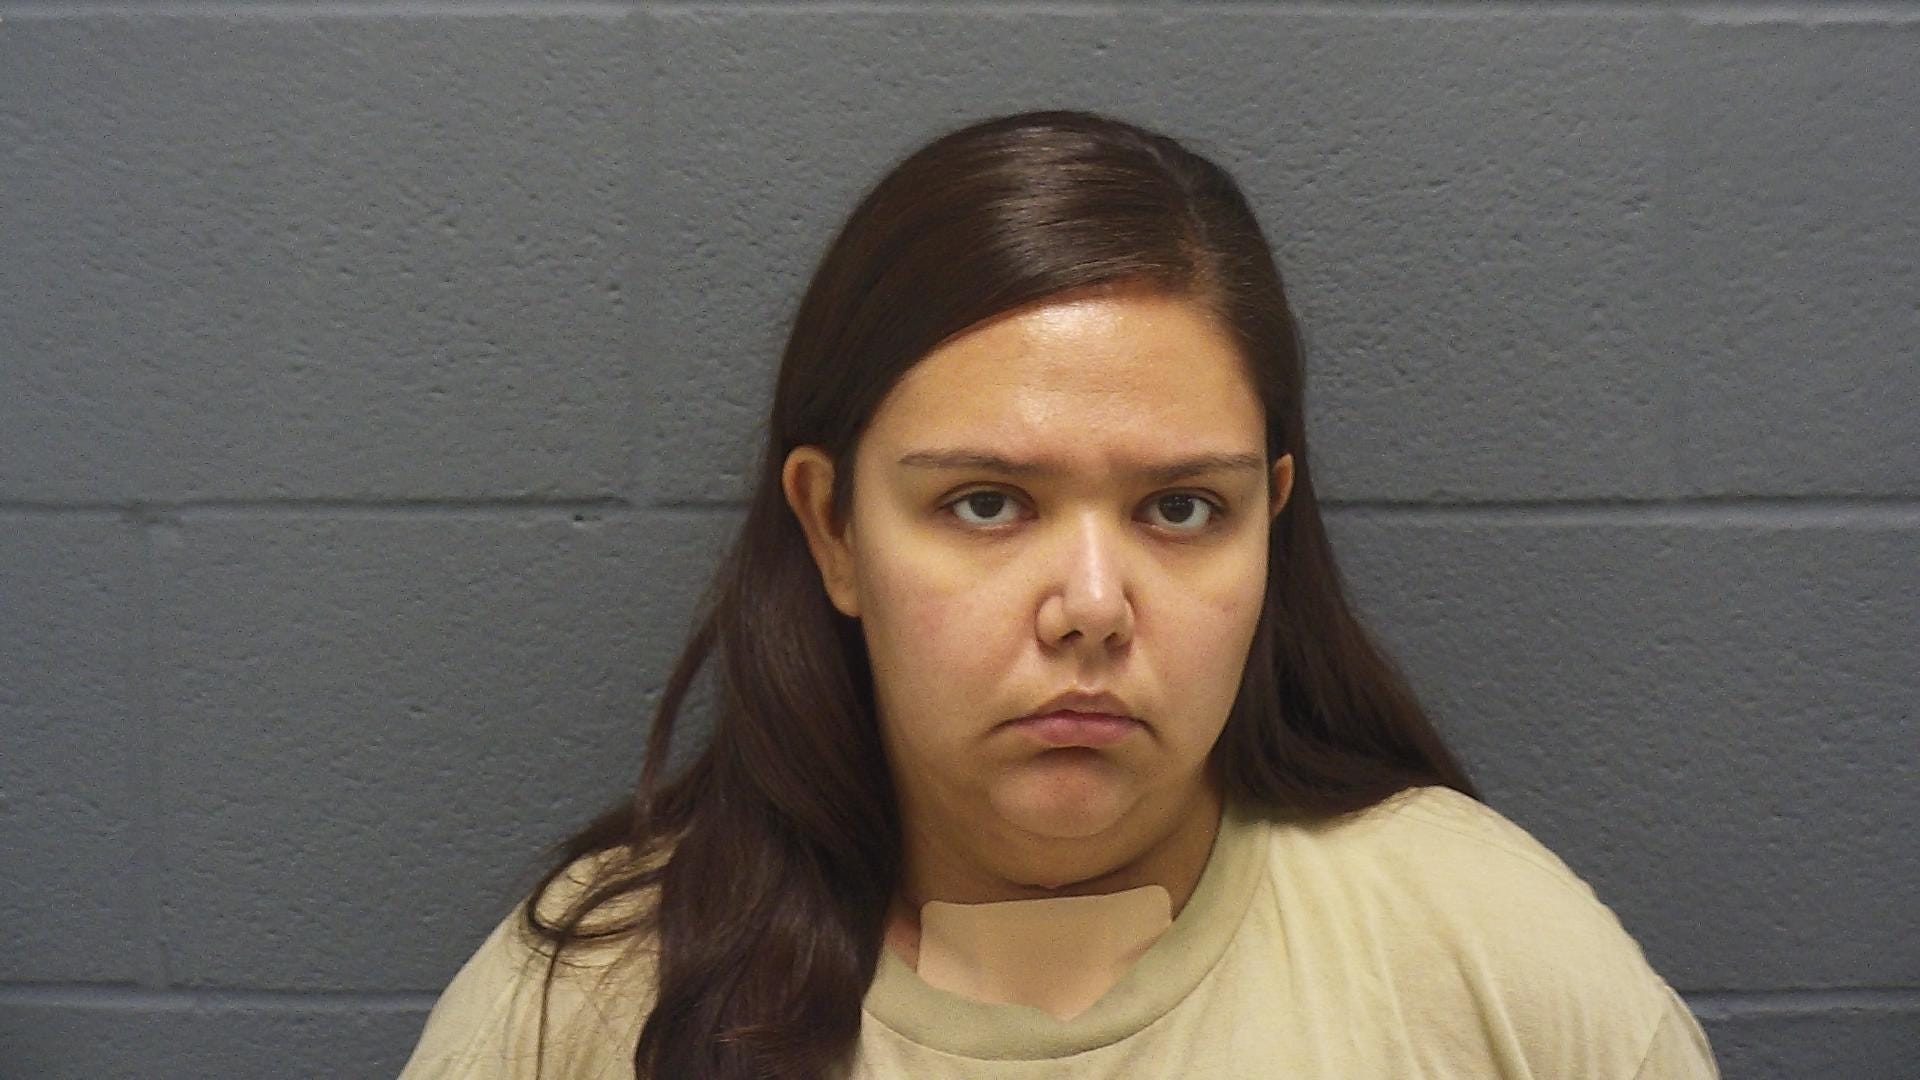 Indiana mother pleads guilty to fatally stabbing her 2 children in 2016